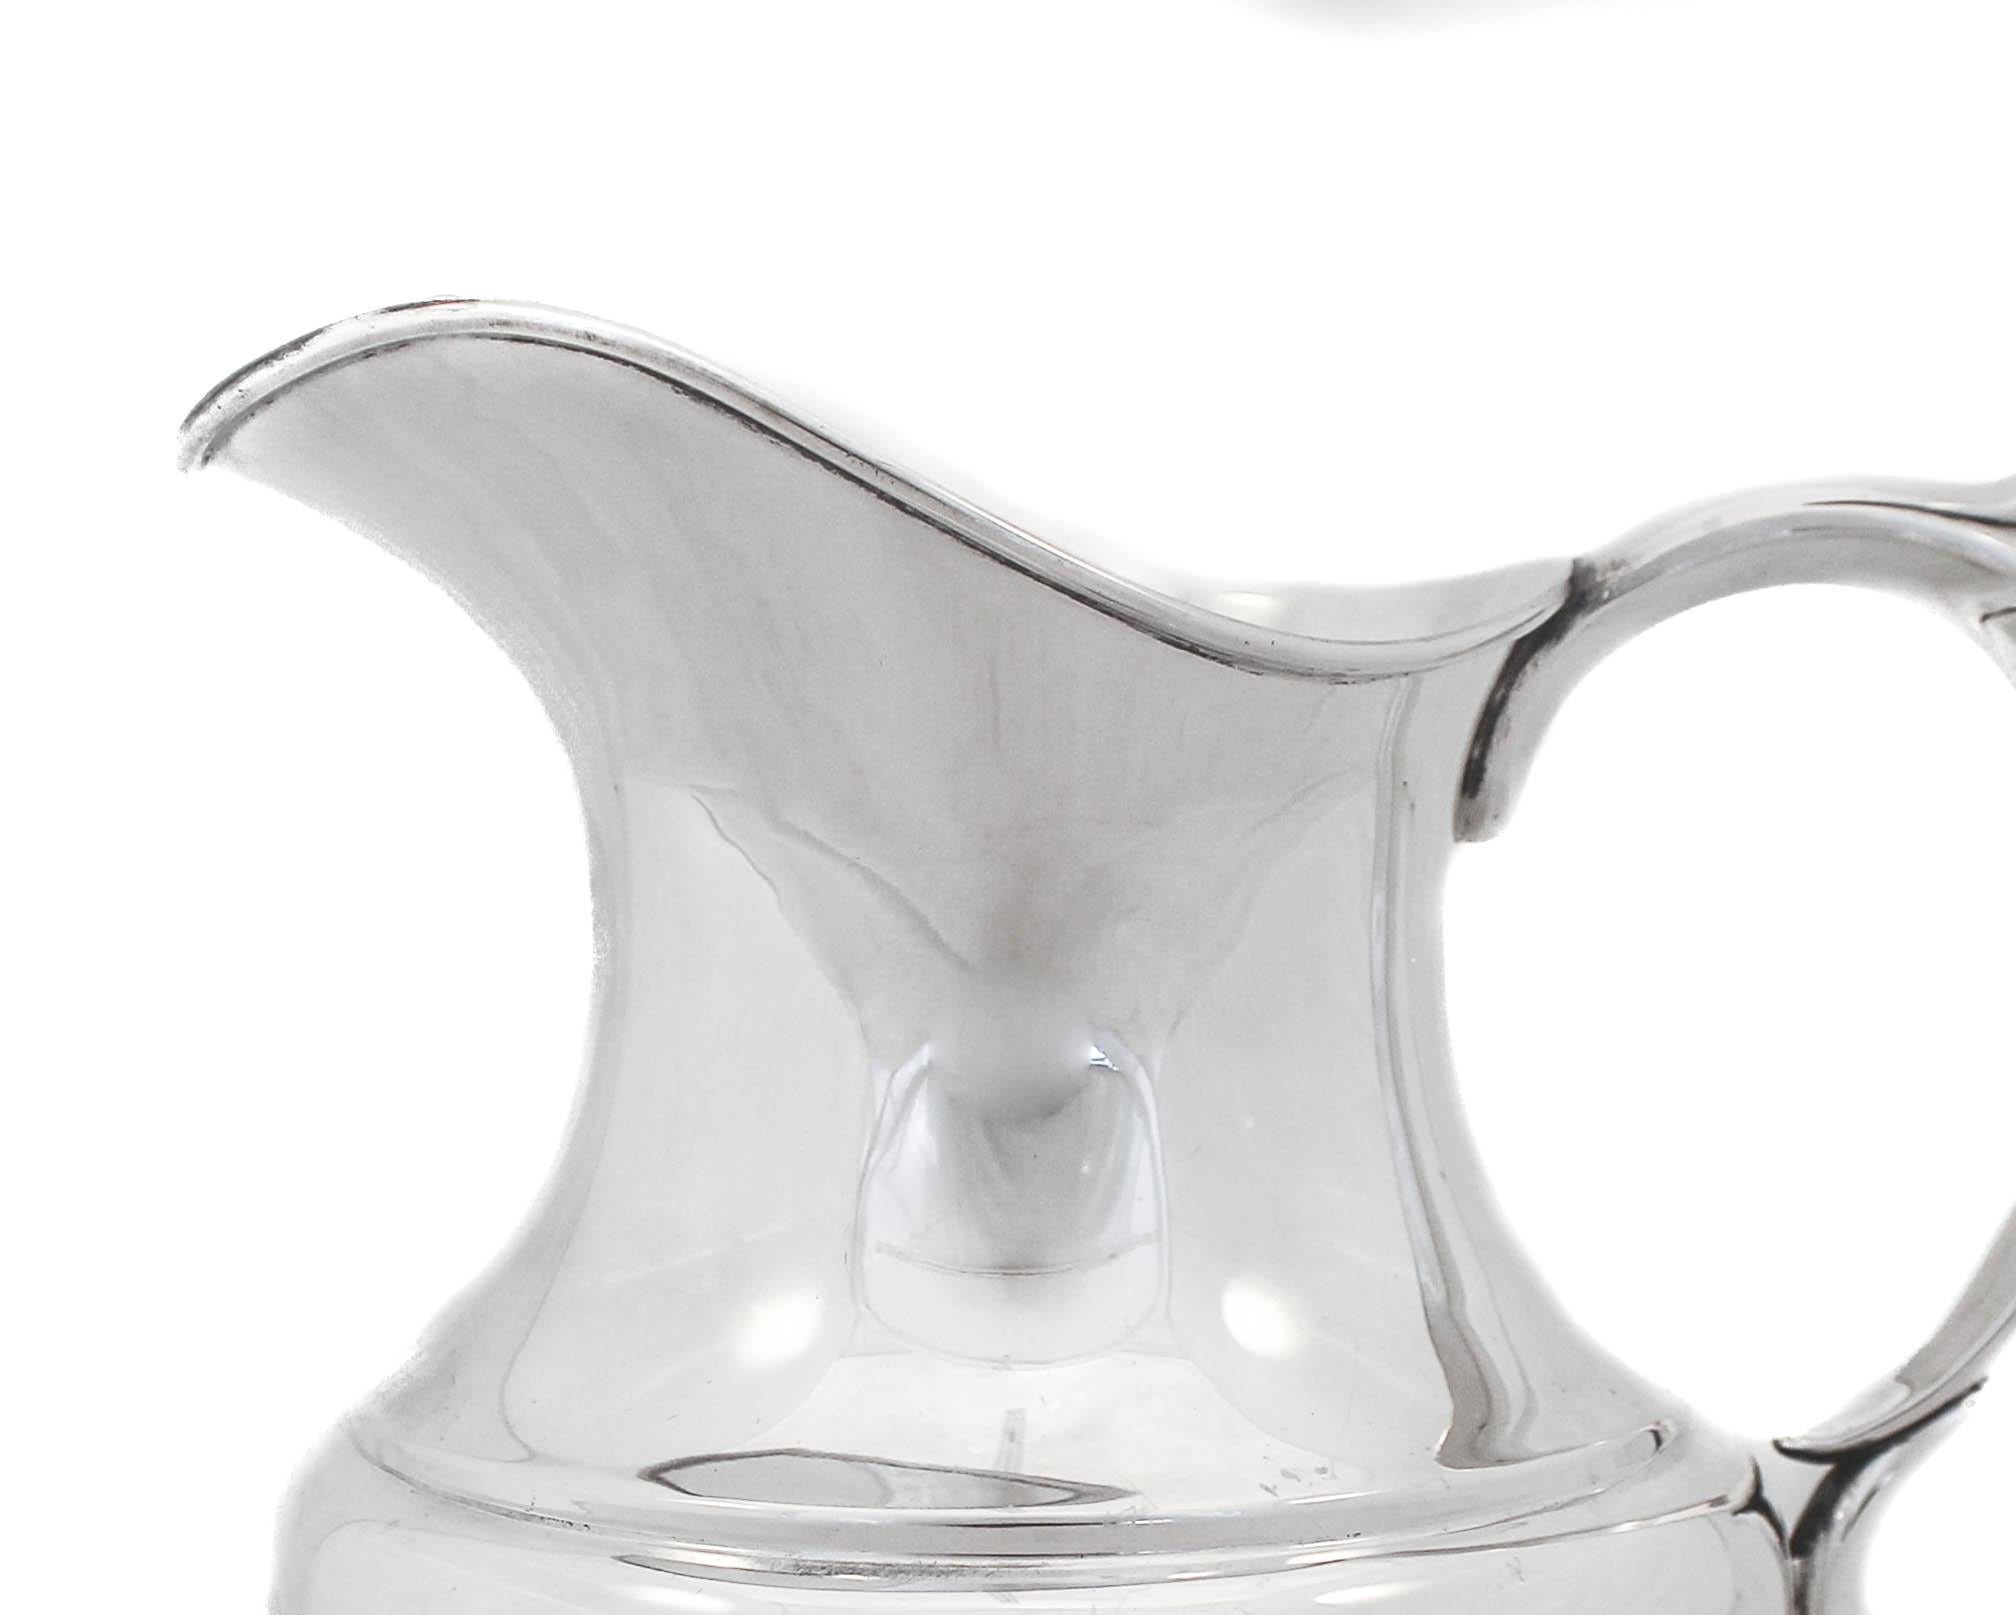 We are happy to offer you this sterling silver water pitcher by Reed and Barton in “The Pilgrim” pattern from the early 1940’s. Sterling silver hollowware that was manufactured during the war was very understated and simple; a reflection of the time